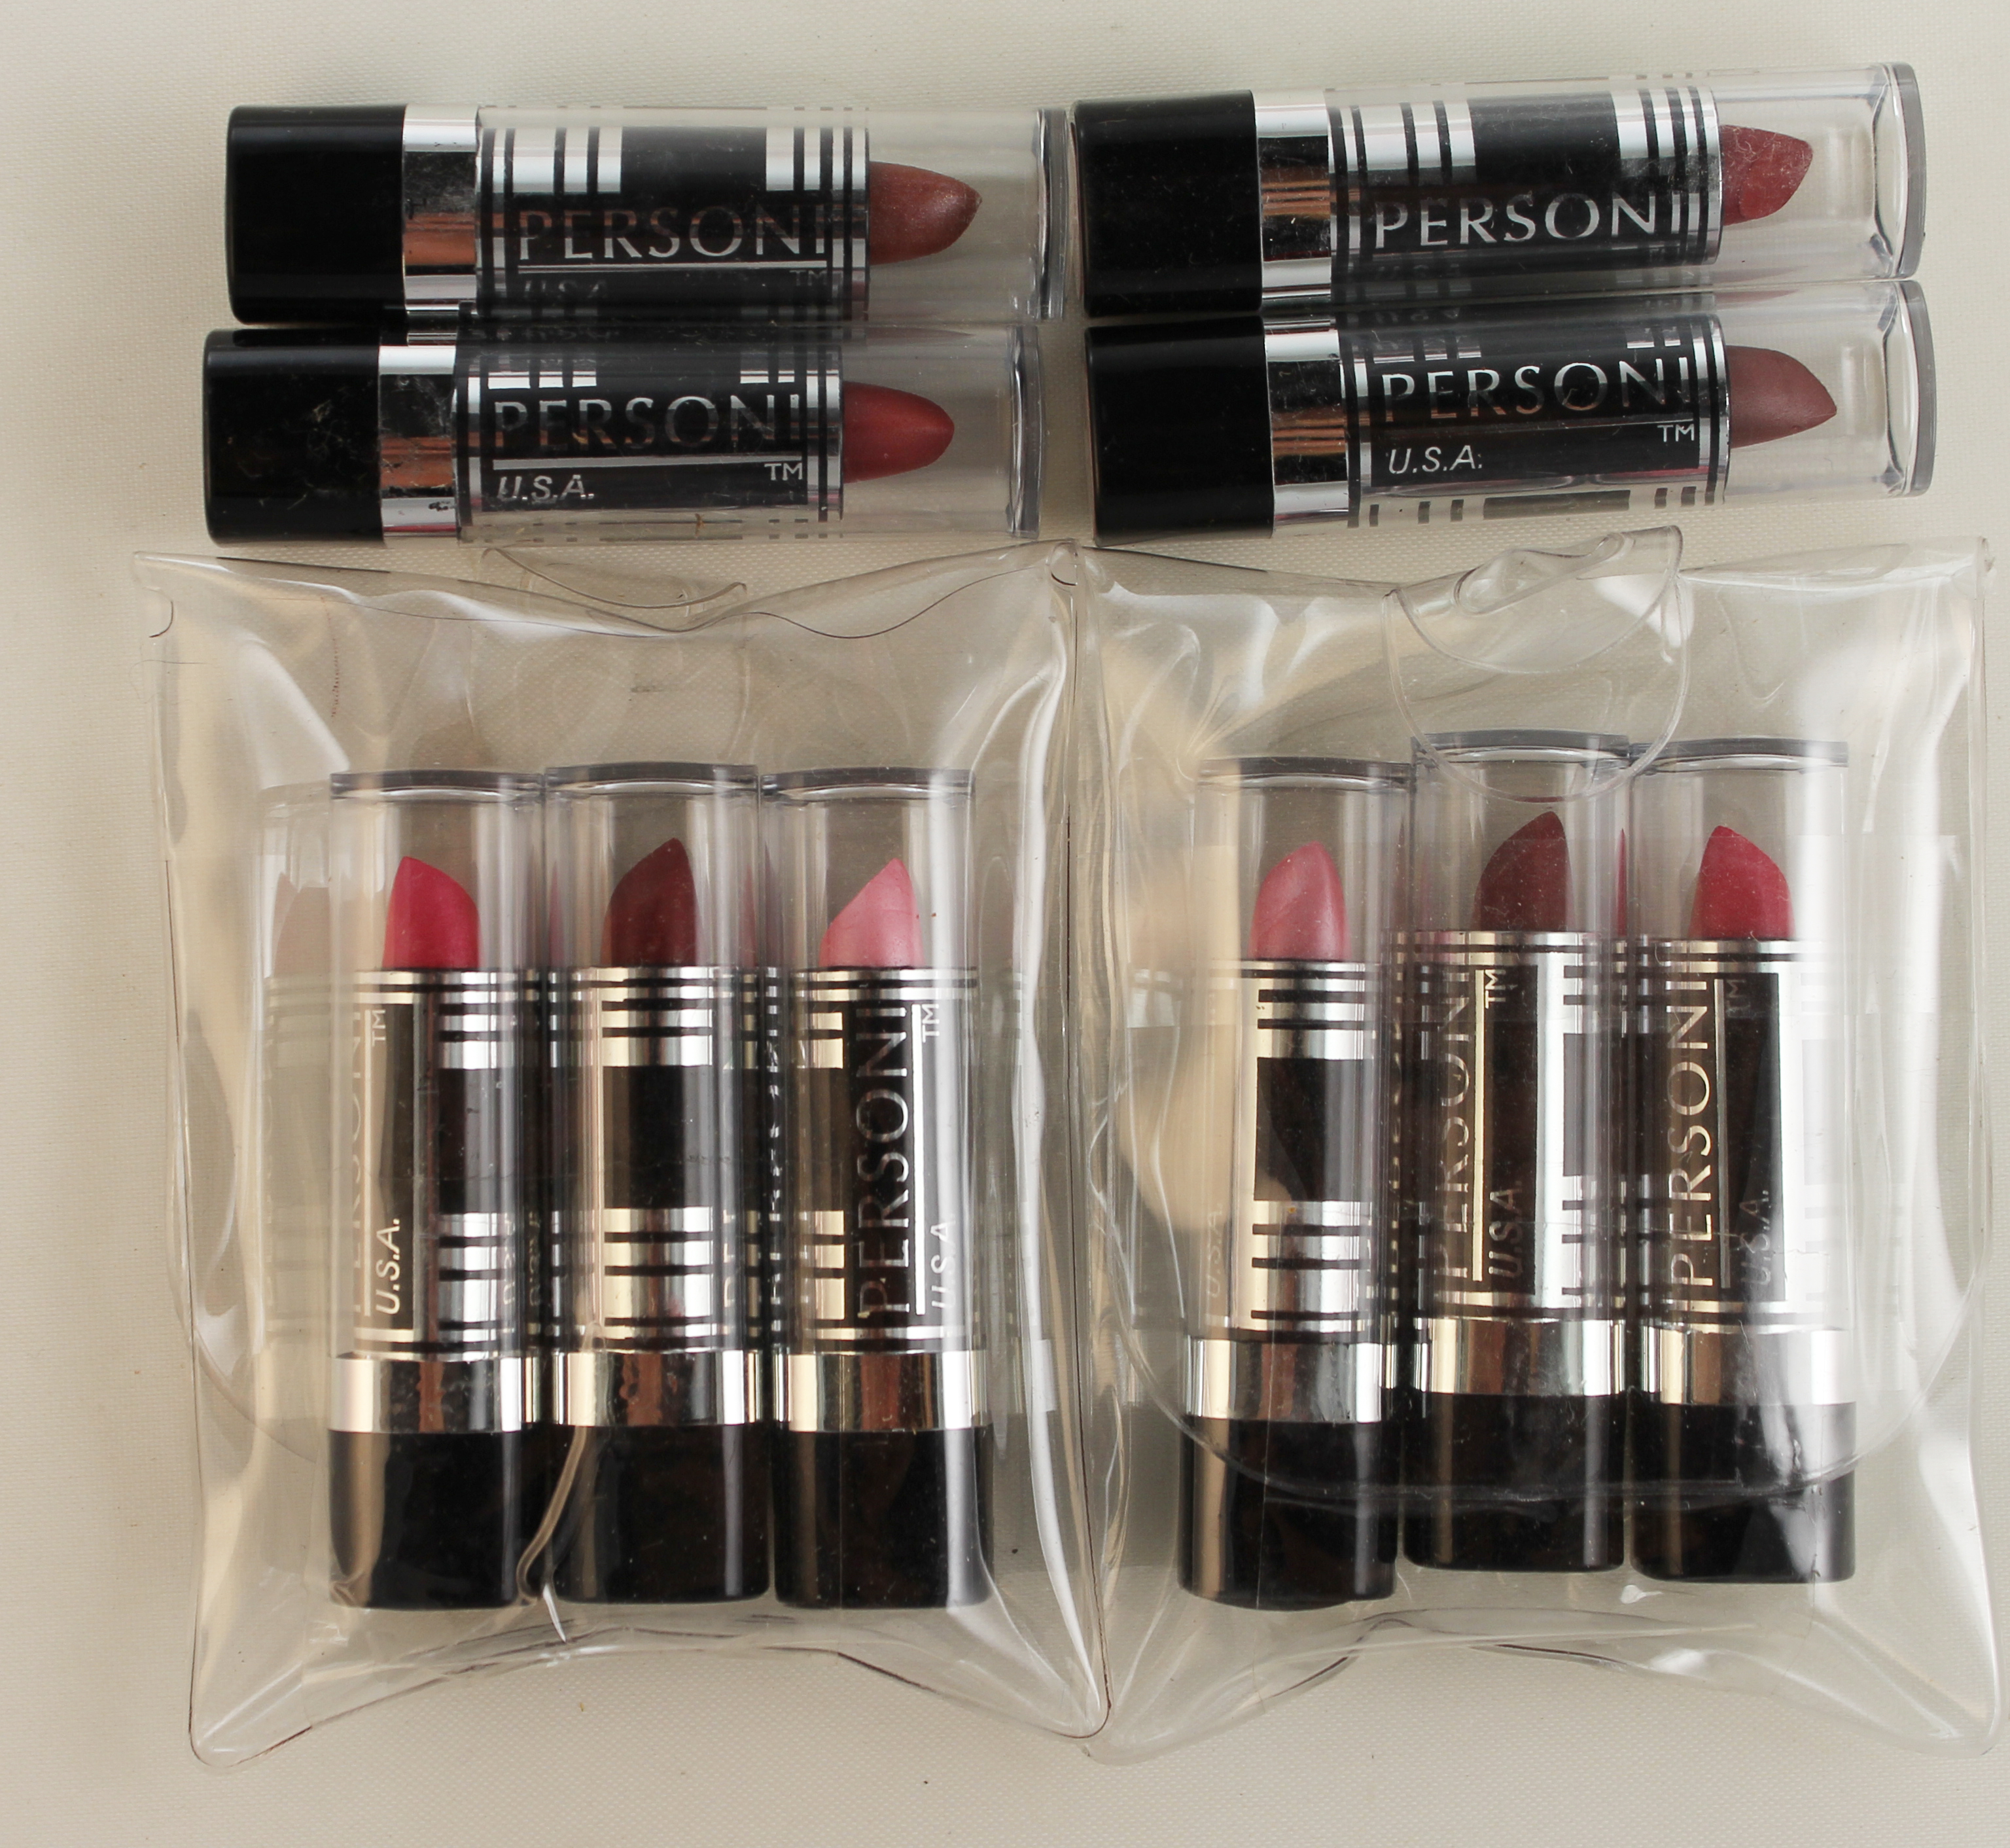 Personi Lip Stick lipsticks in assorted colors (Sold in lots of 12)